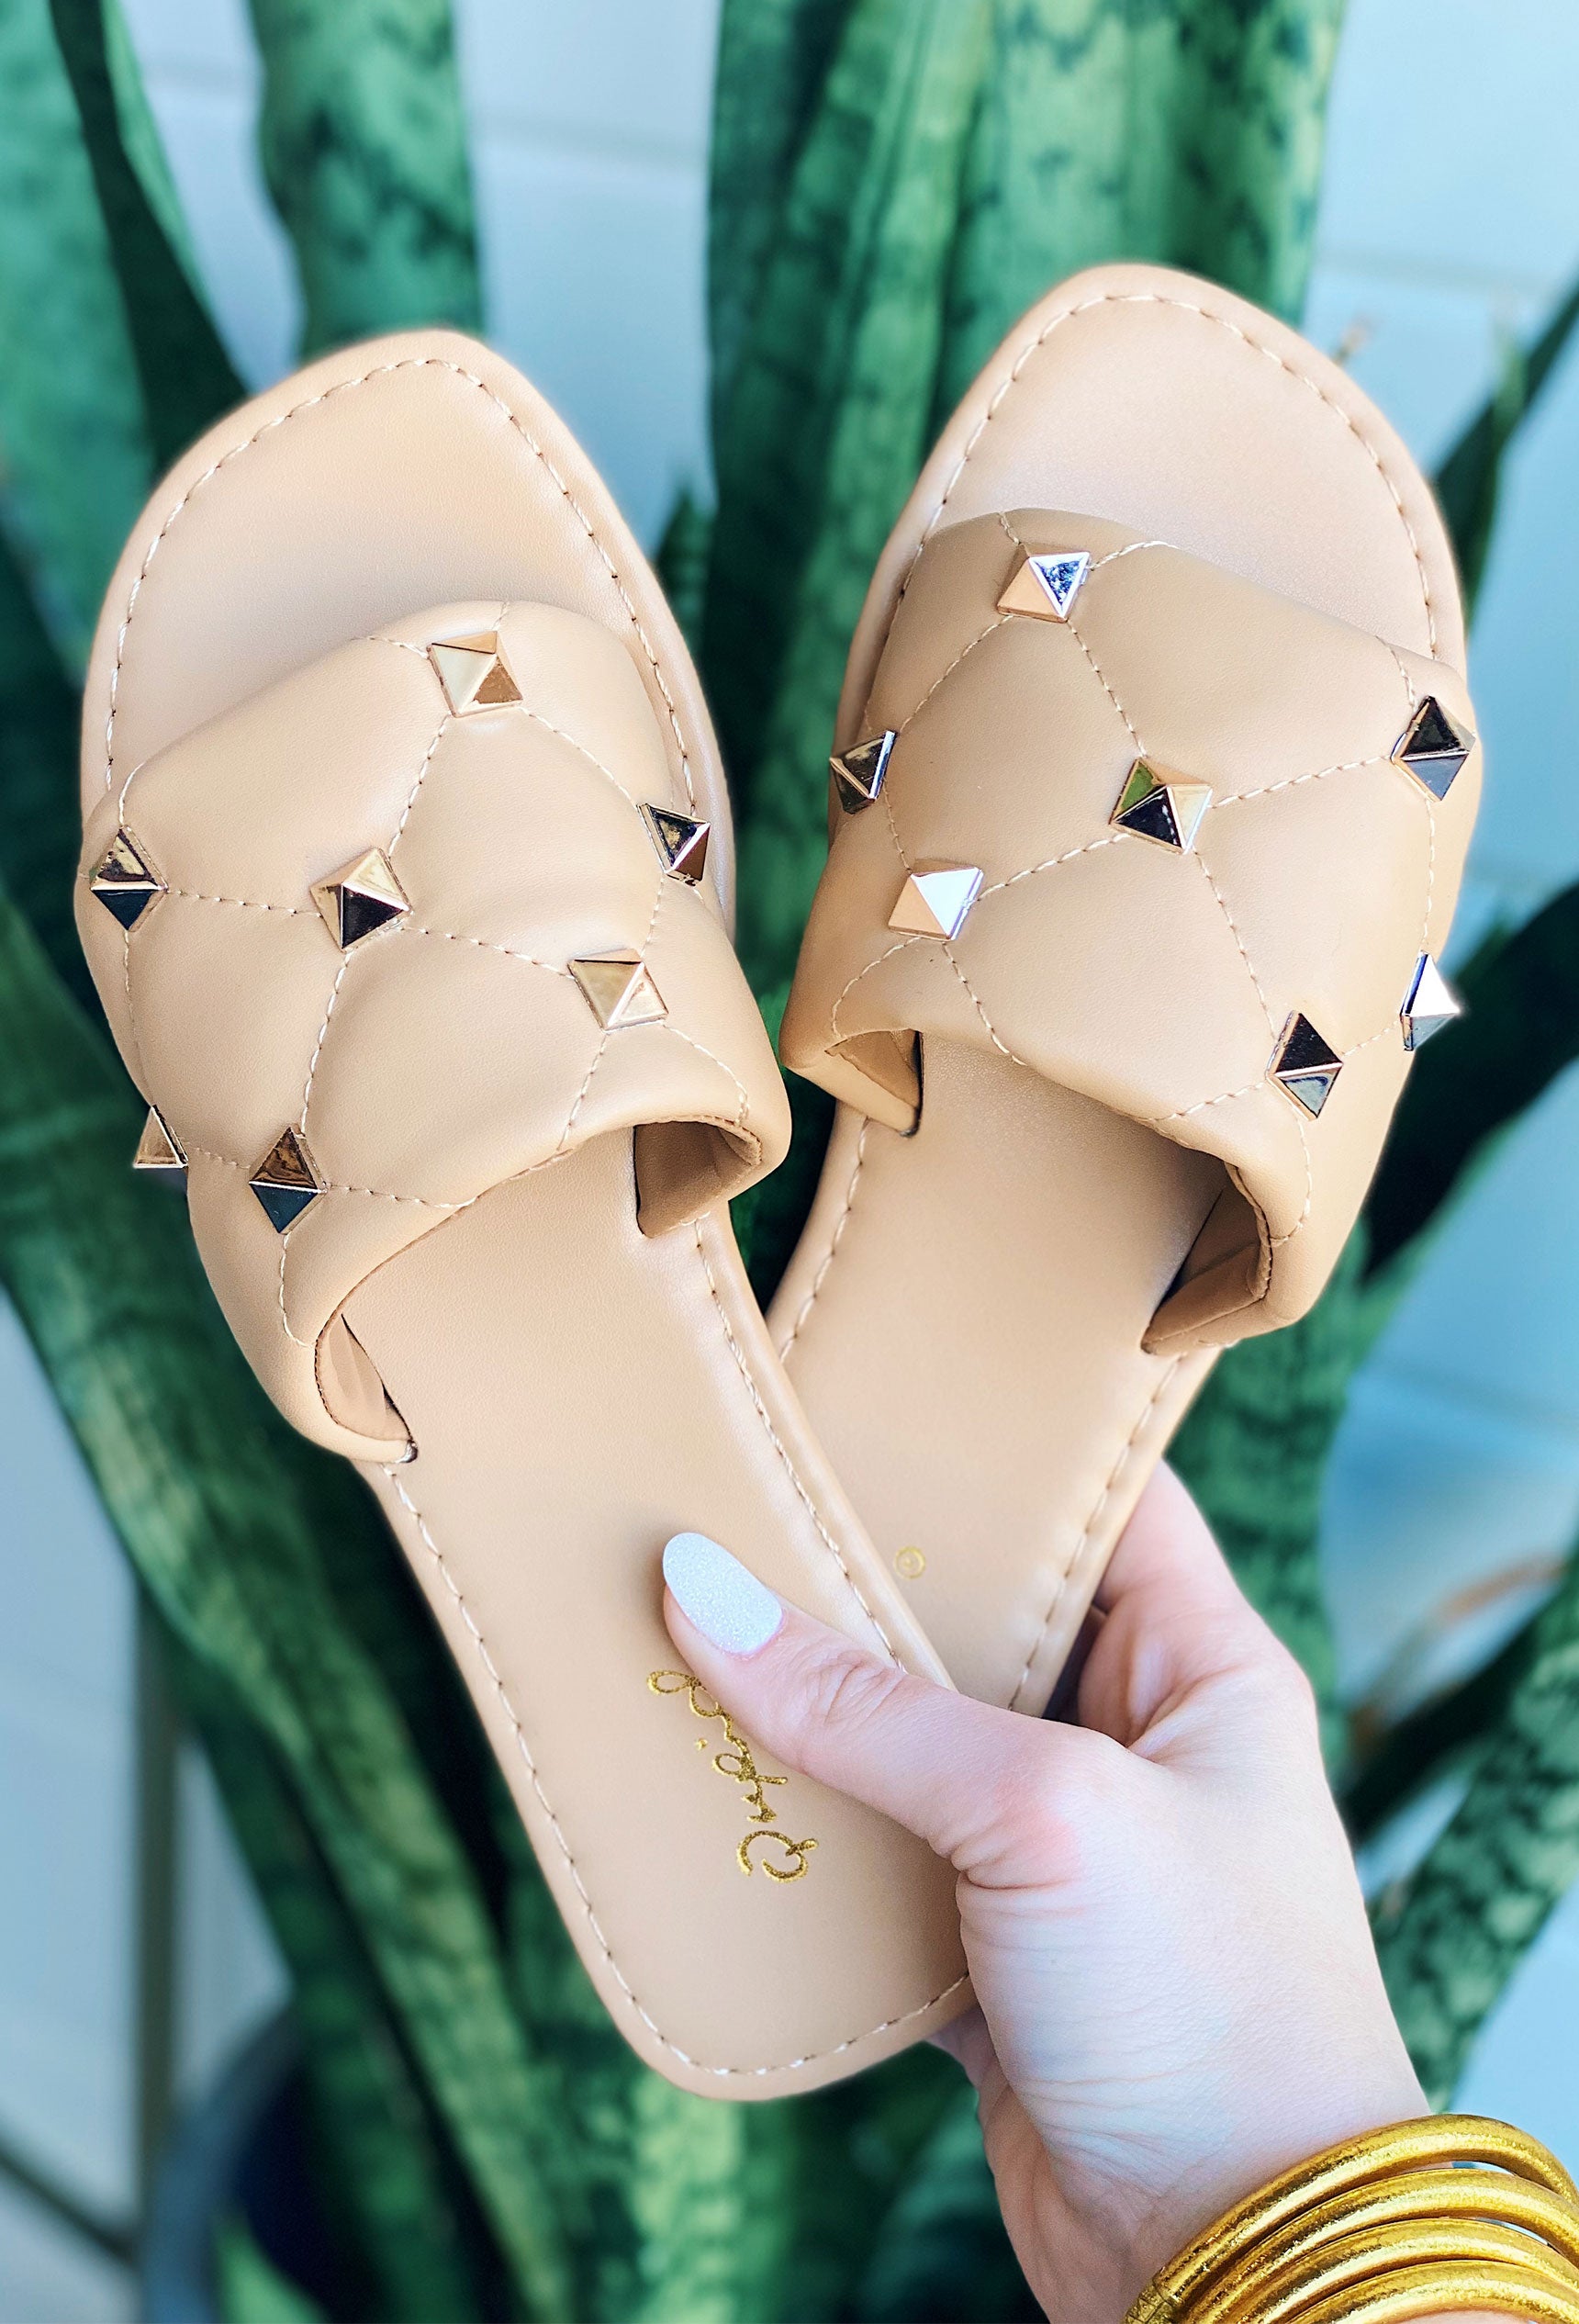 All My Love Slip On Sandals in Tan, tan sandals with quilted look with gold studs